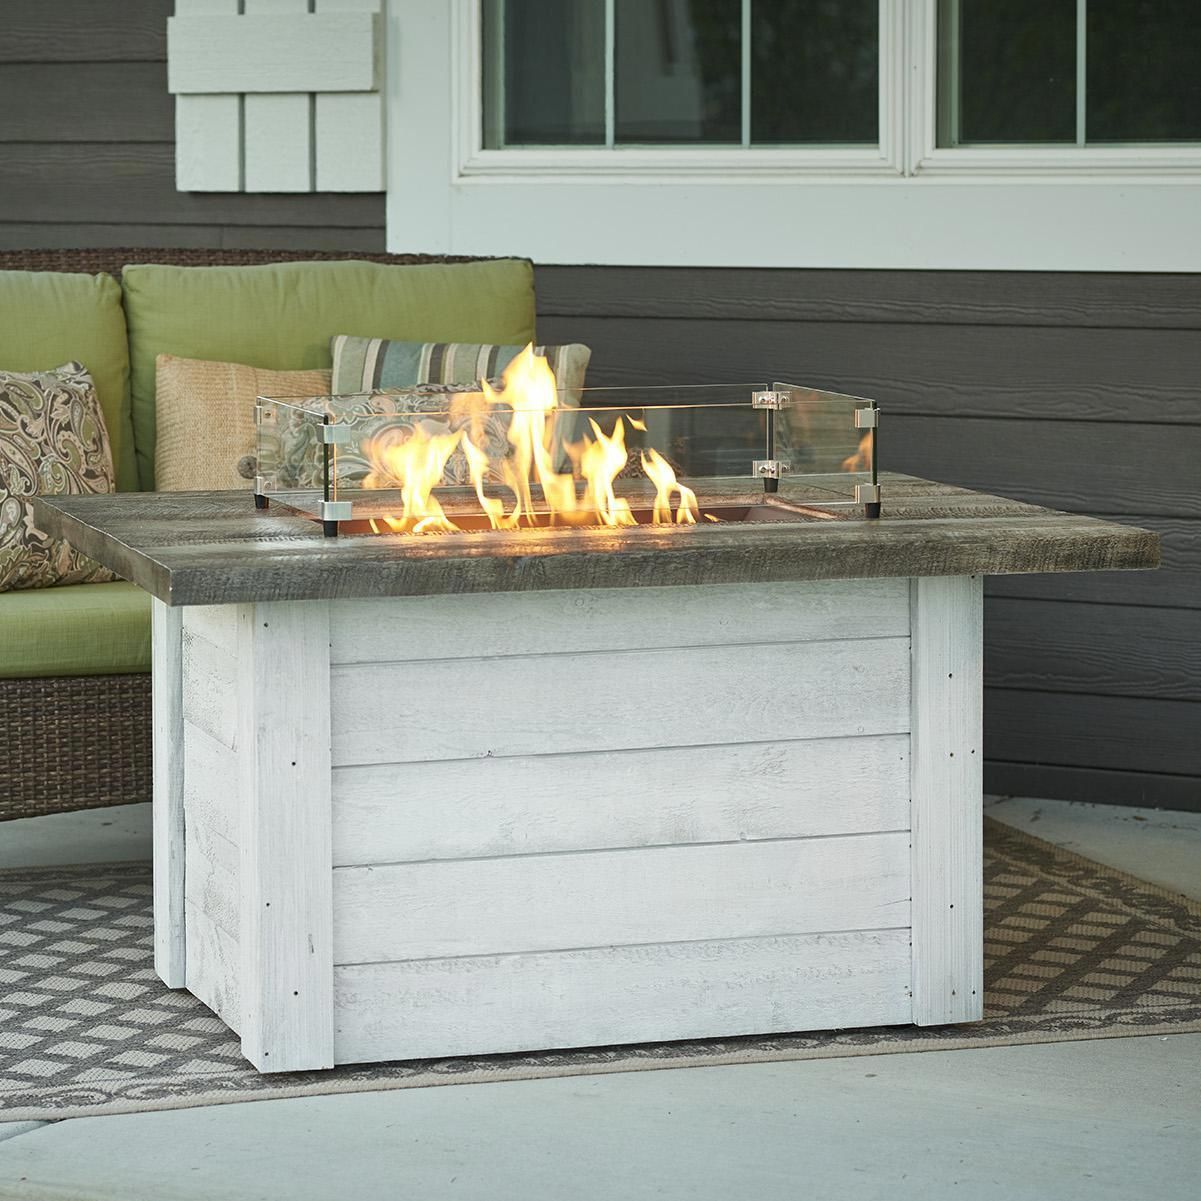 The Outdoor GreatRoom Company Alcott 48-Inch Rectangular Propane Gas Fire Pit Table with 24-Inch Crystal Fire Burner - Antique Timber - ALC-1224 -   13 garden design Rectangular fire pits ideas